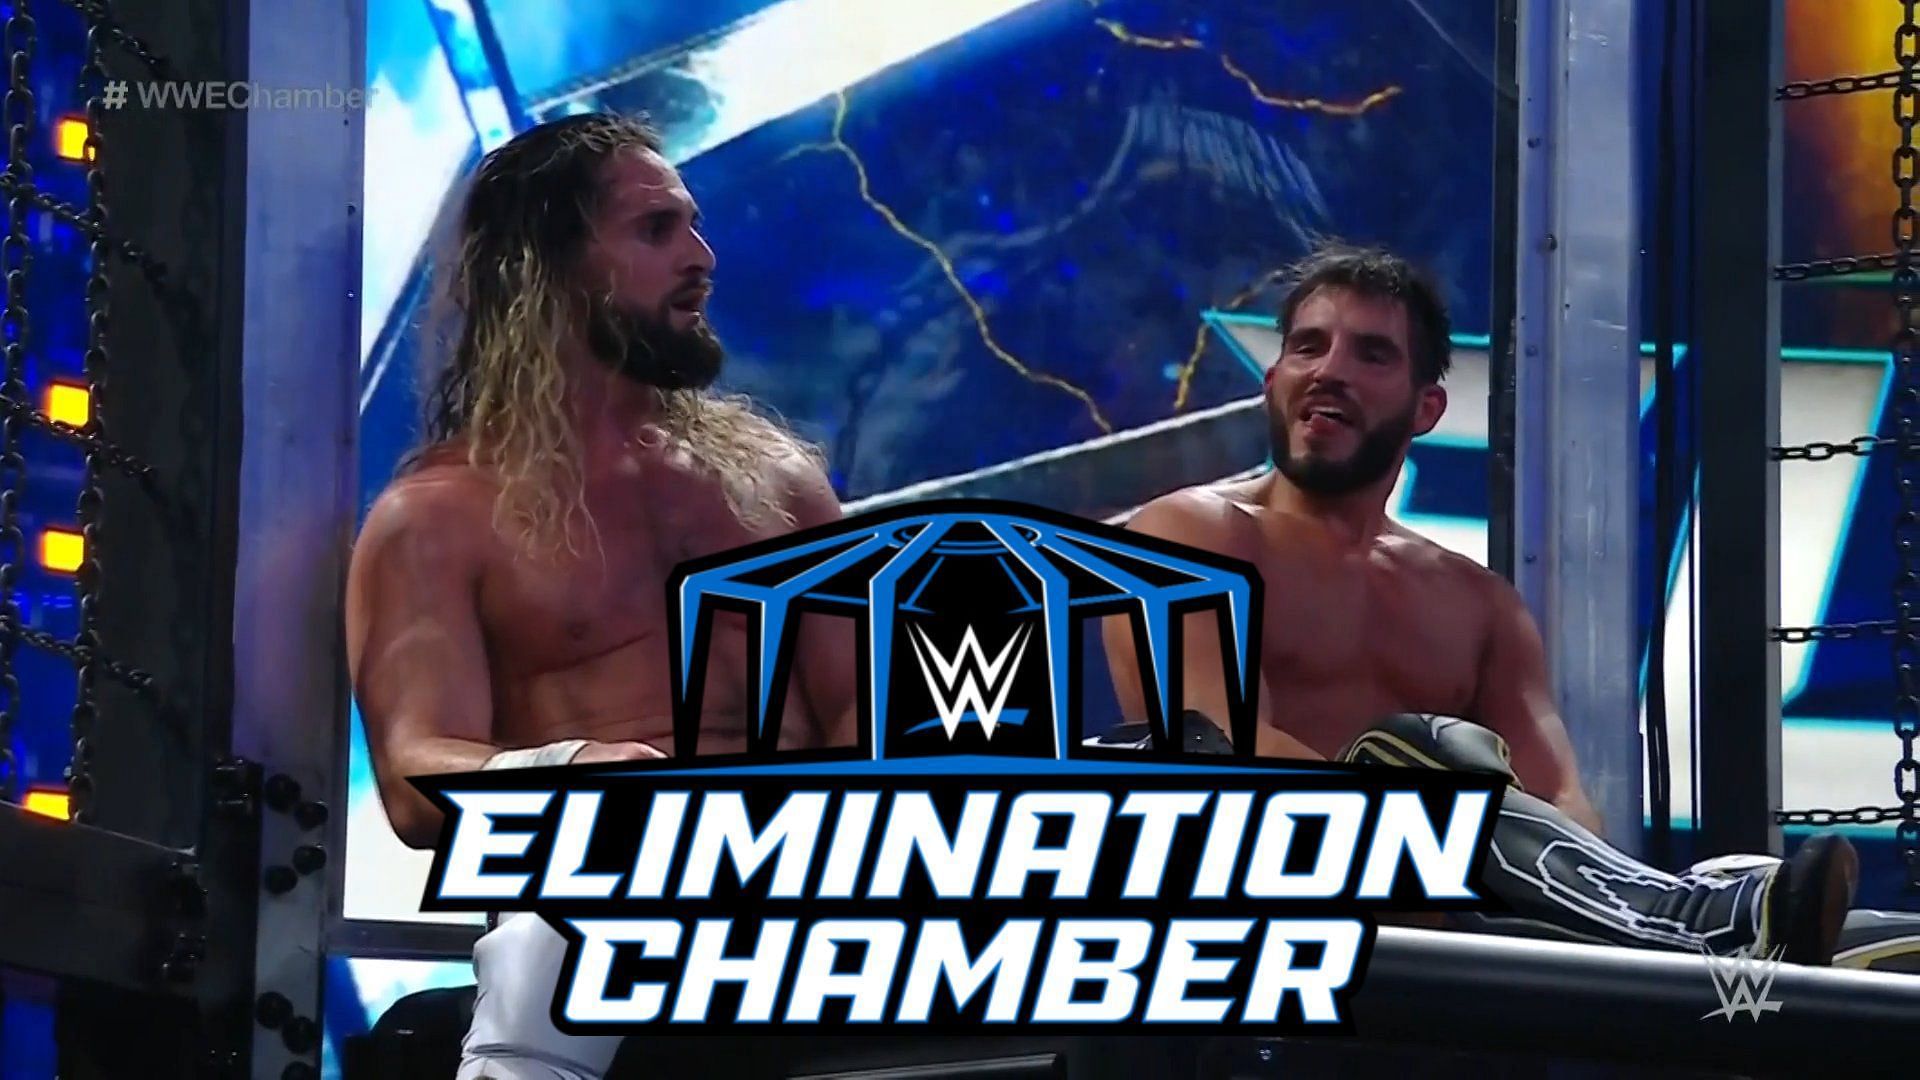 Scene from the United States Championship Elimination Chamber match.